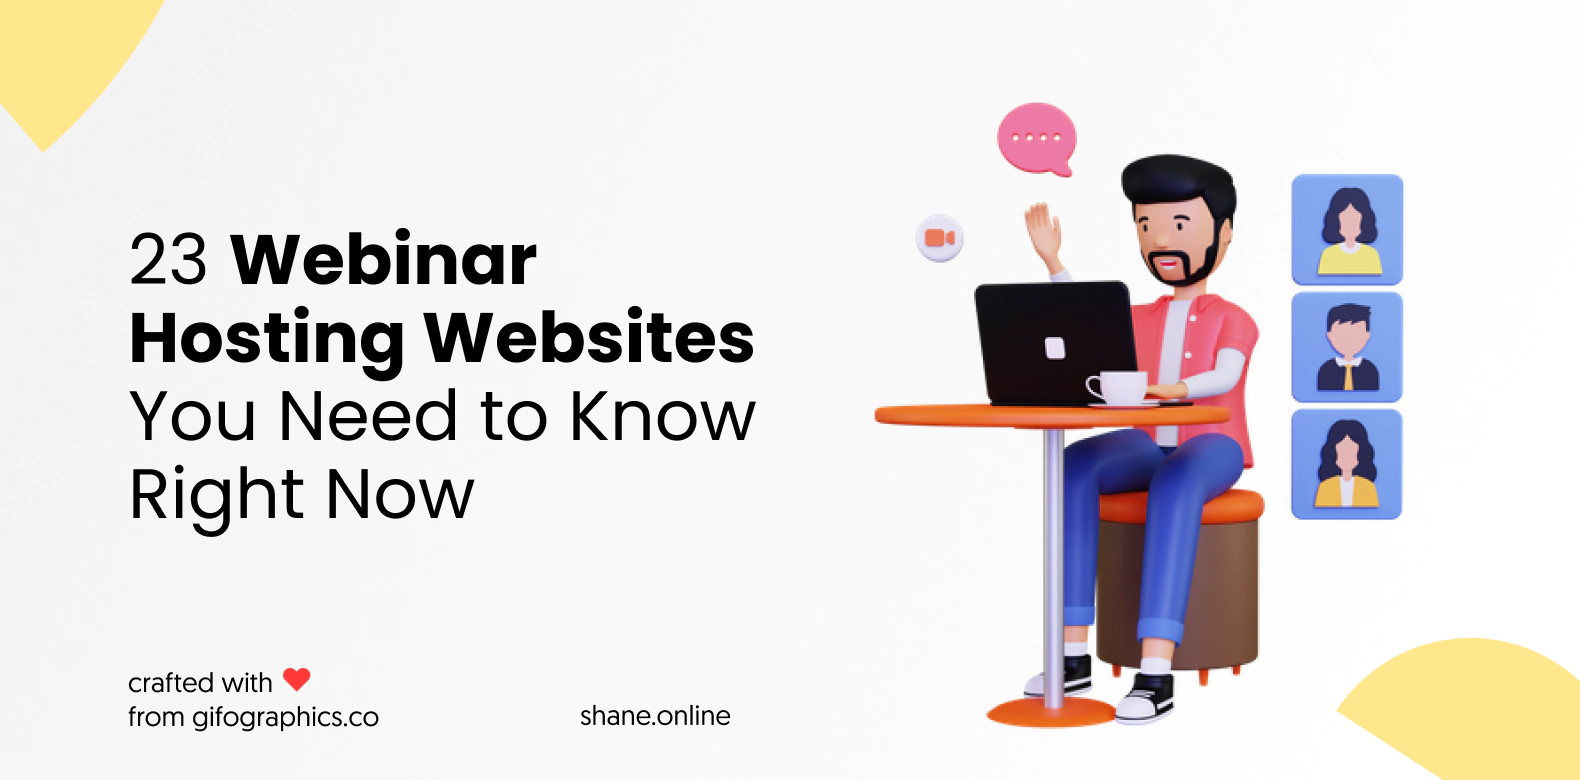 Webinar Hosting Websites You Need to Know Right Now